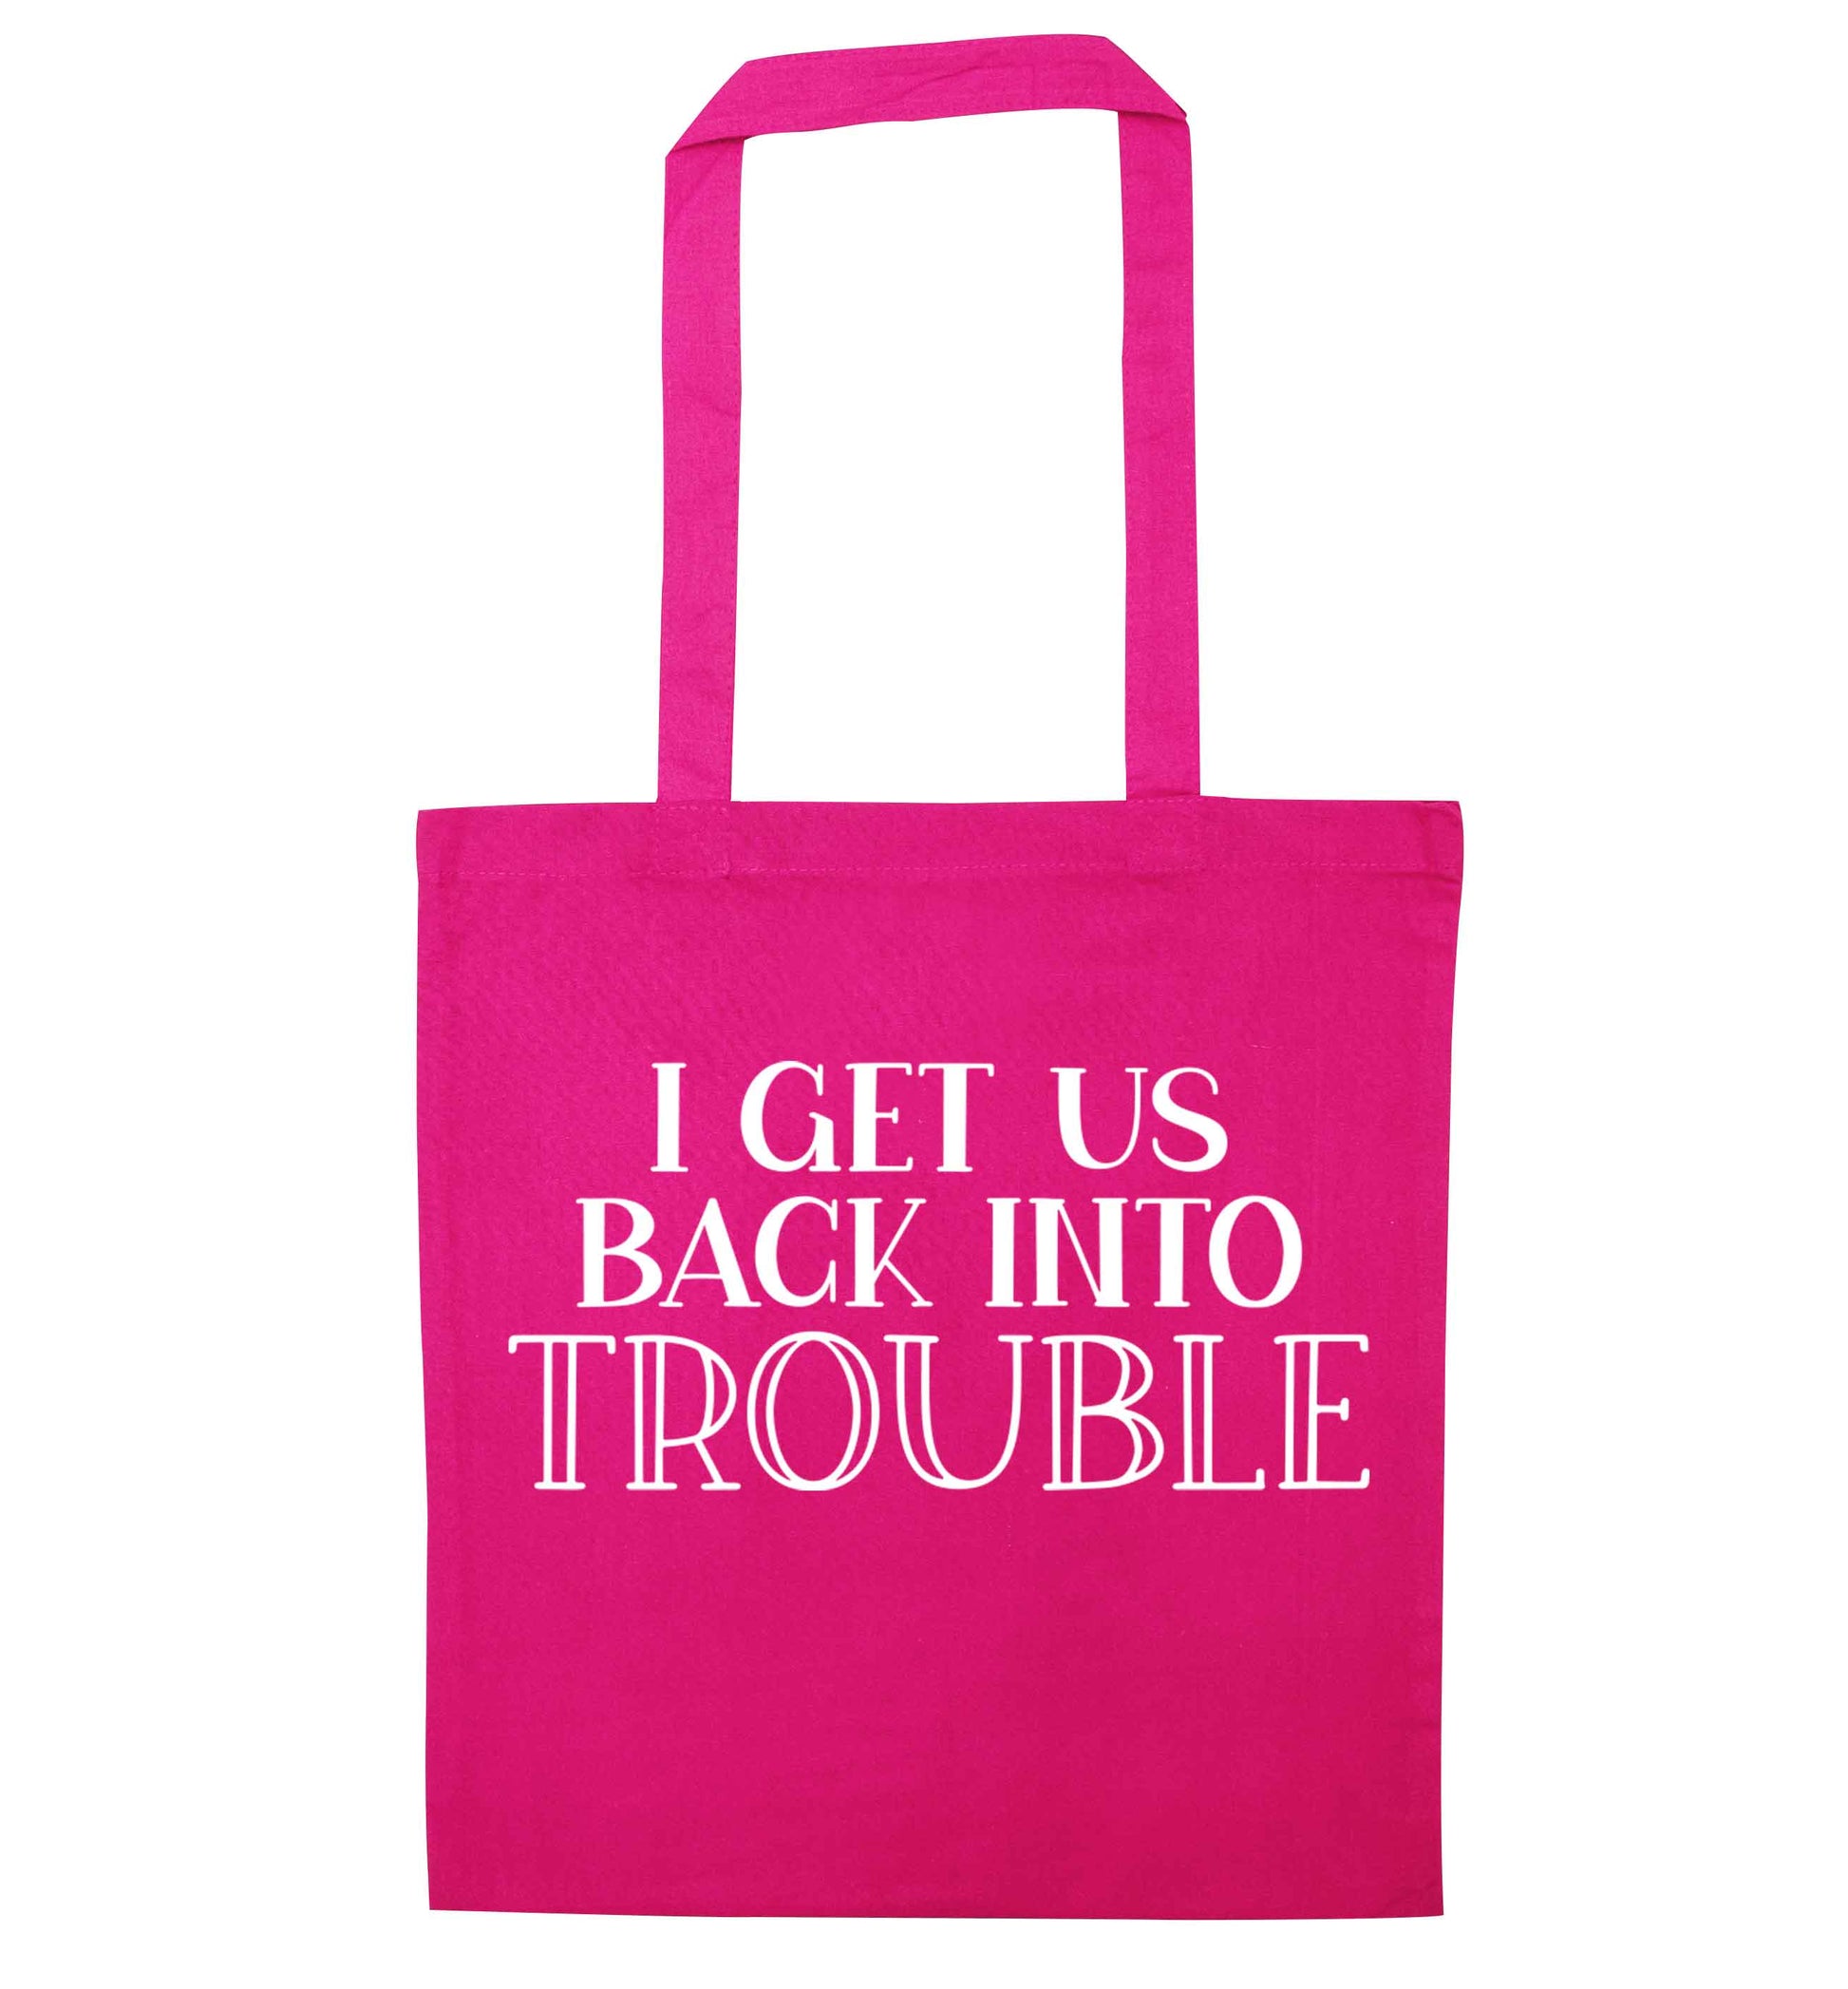 I get us back into trouble pink tote bag